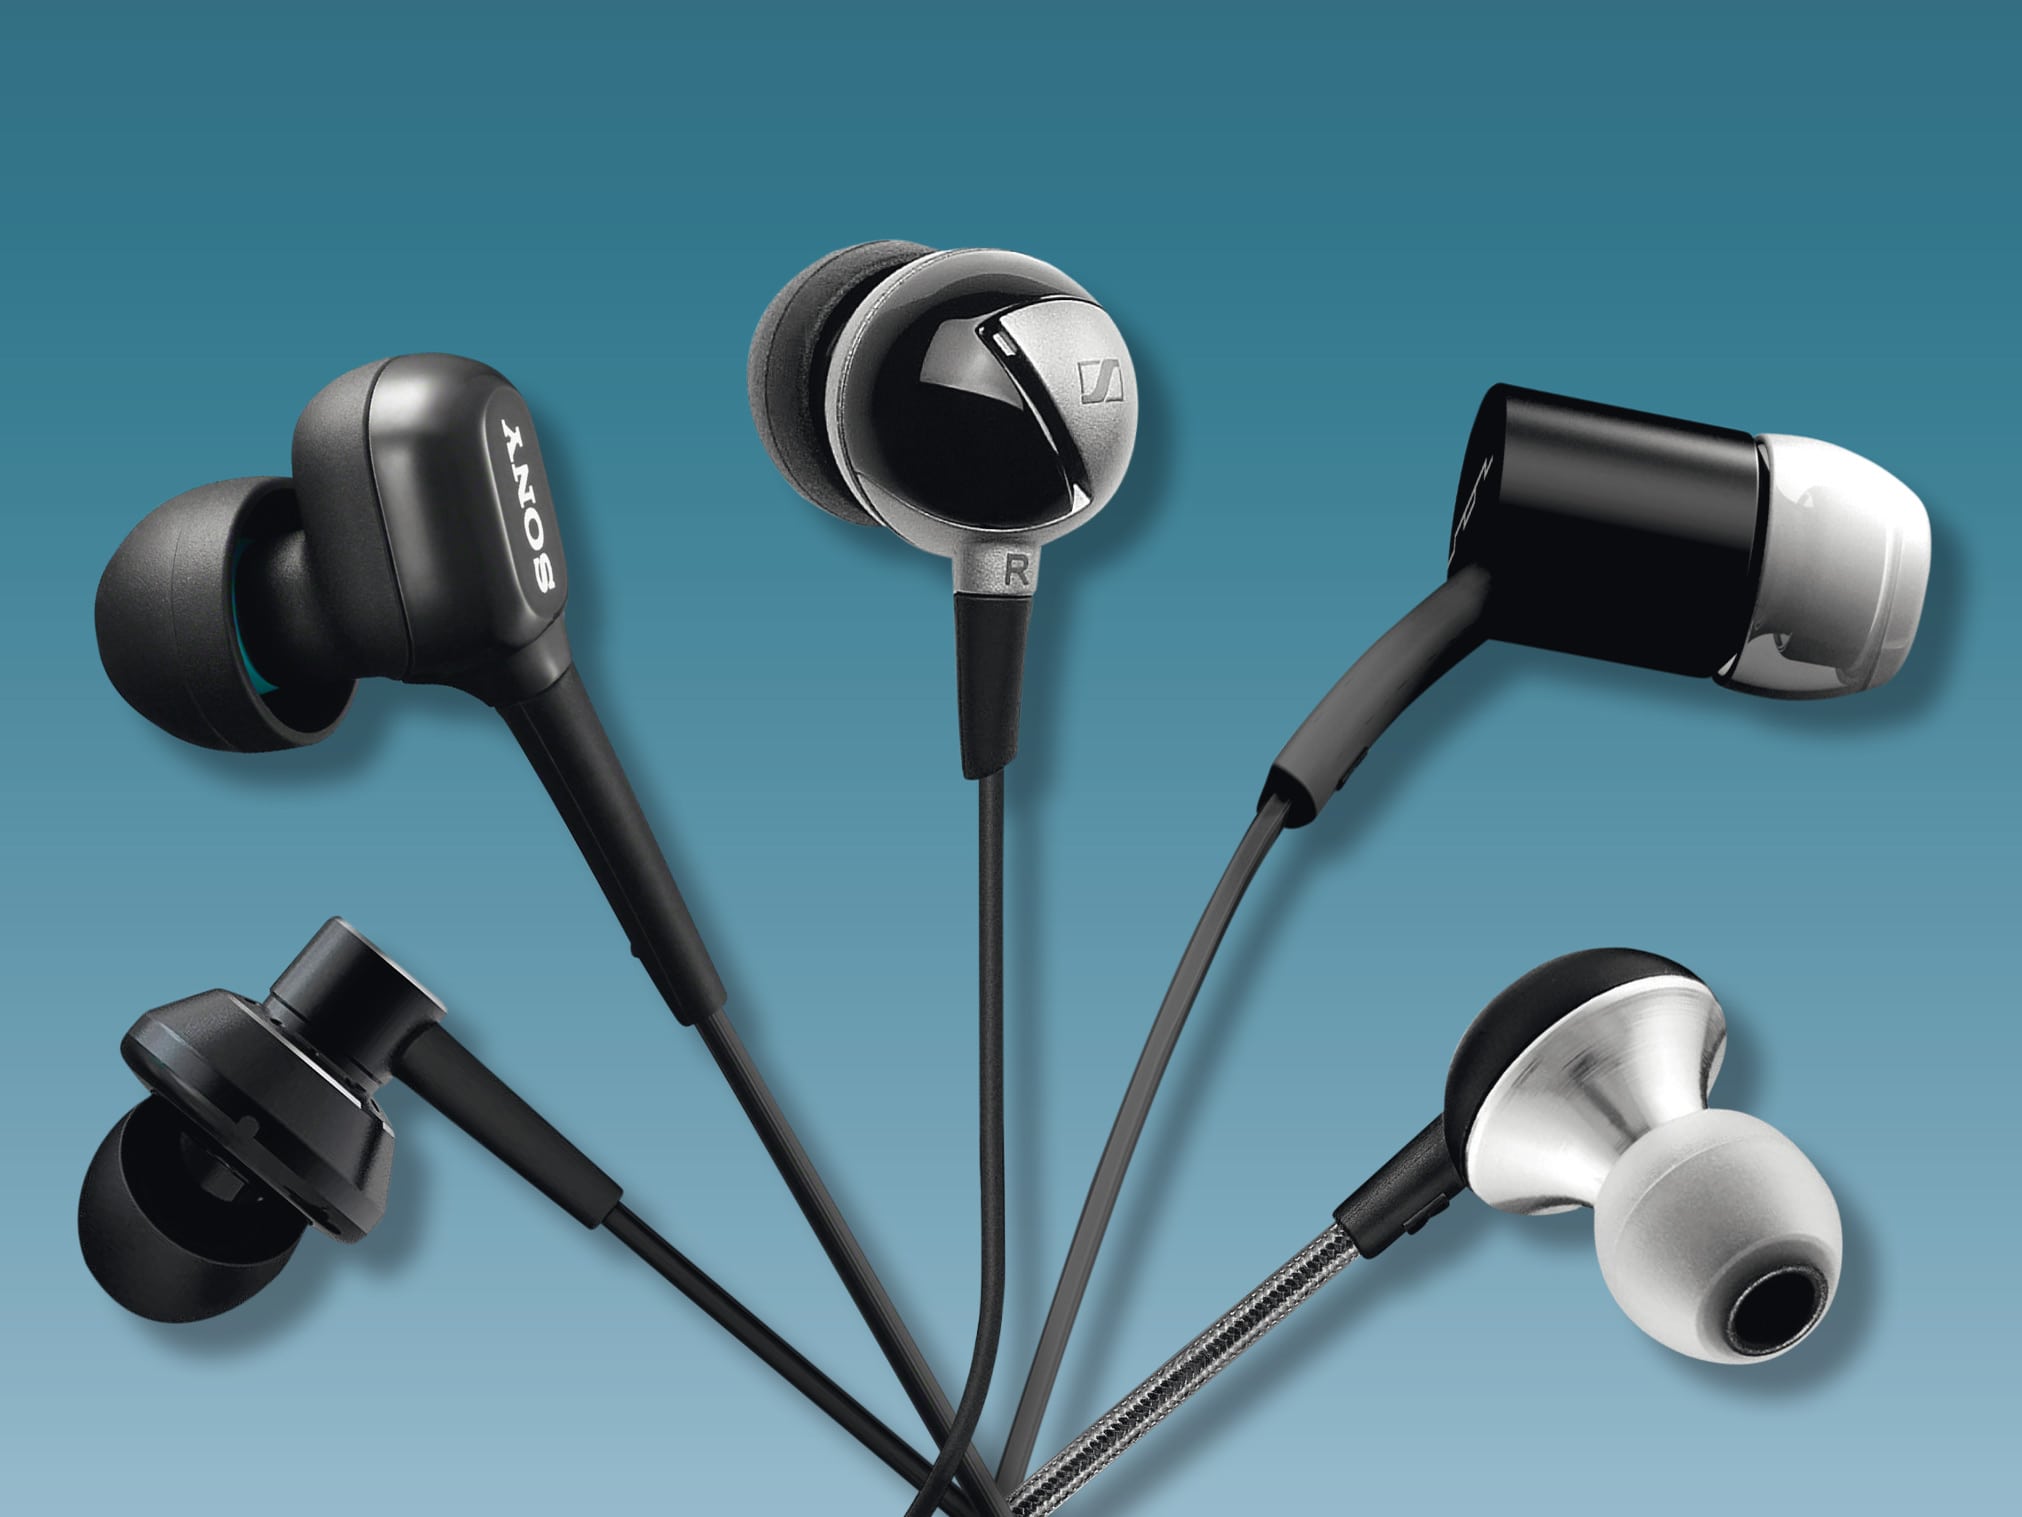 most durable earbuds